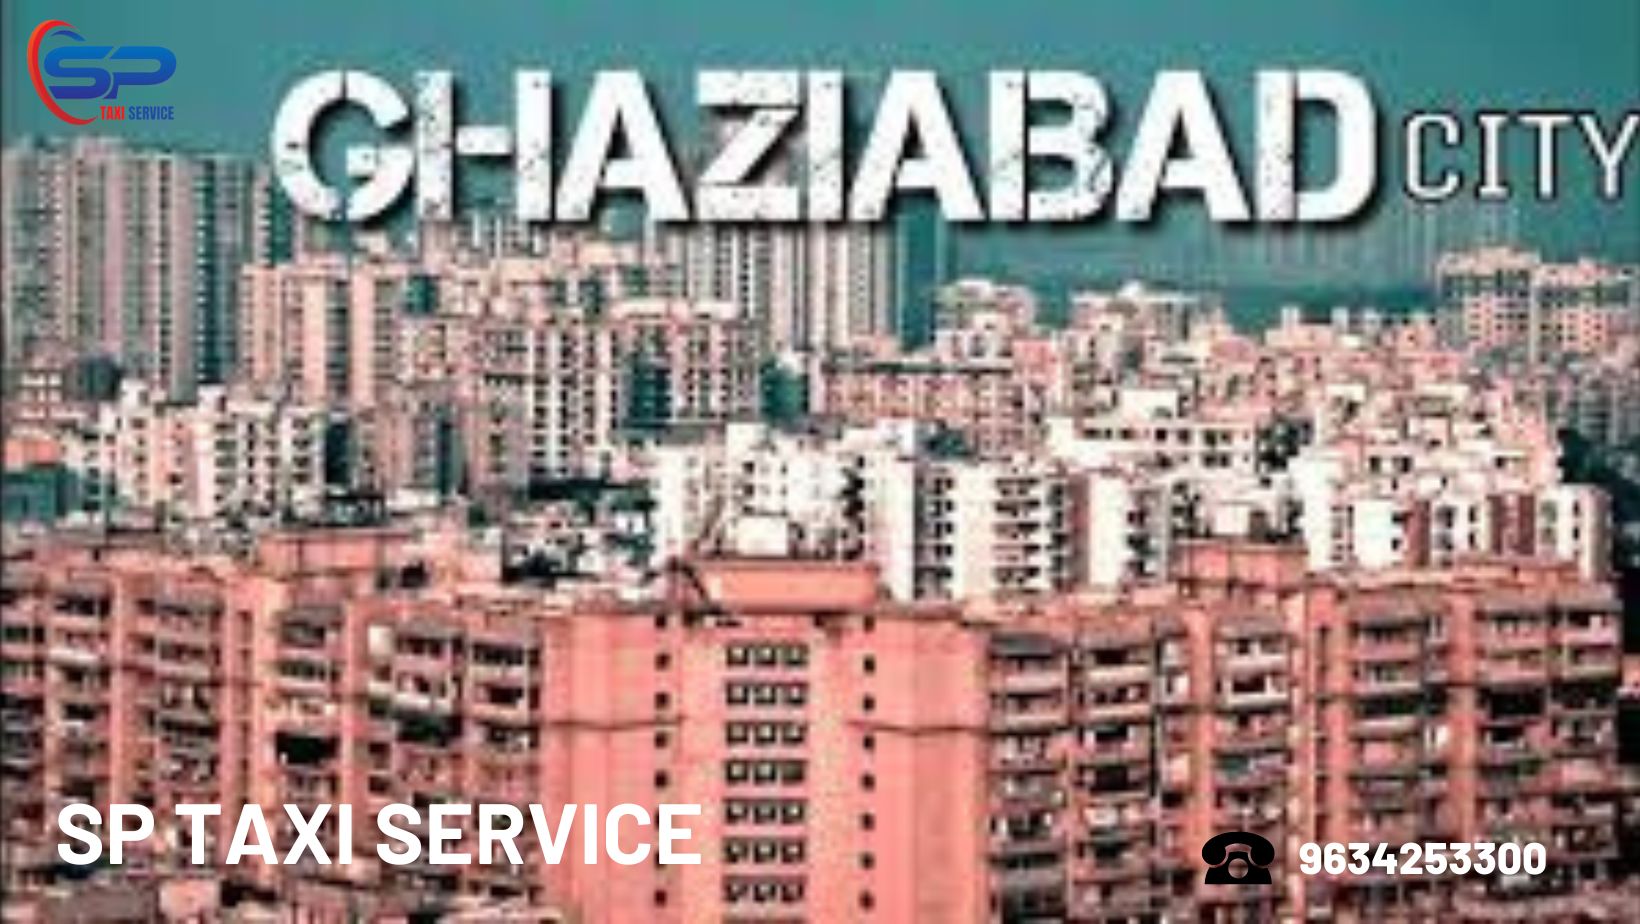 Ghaziabad Taxi service